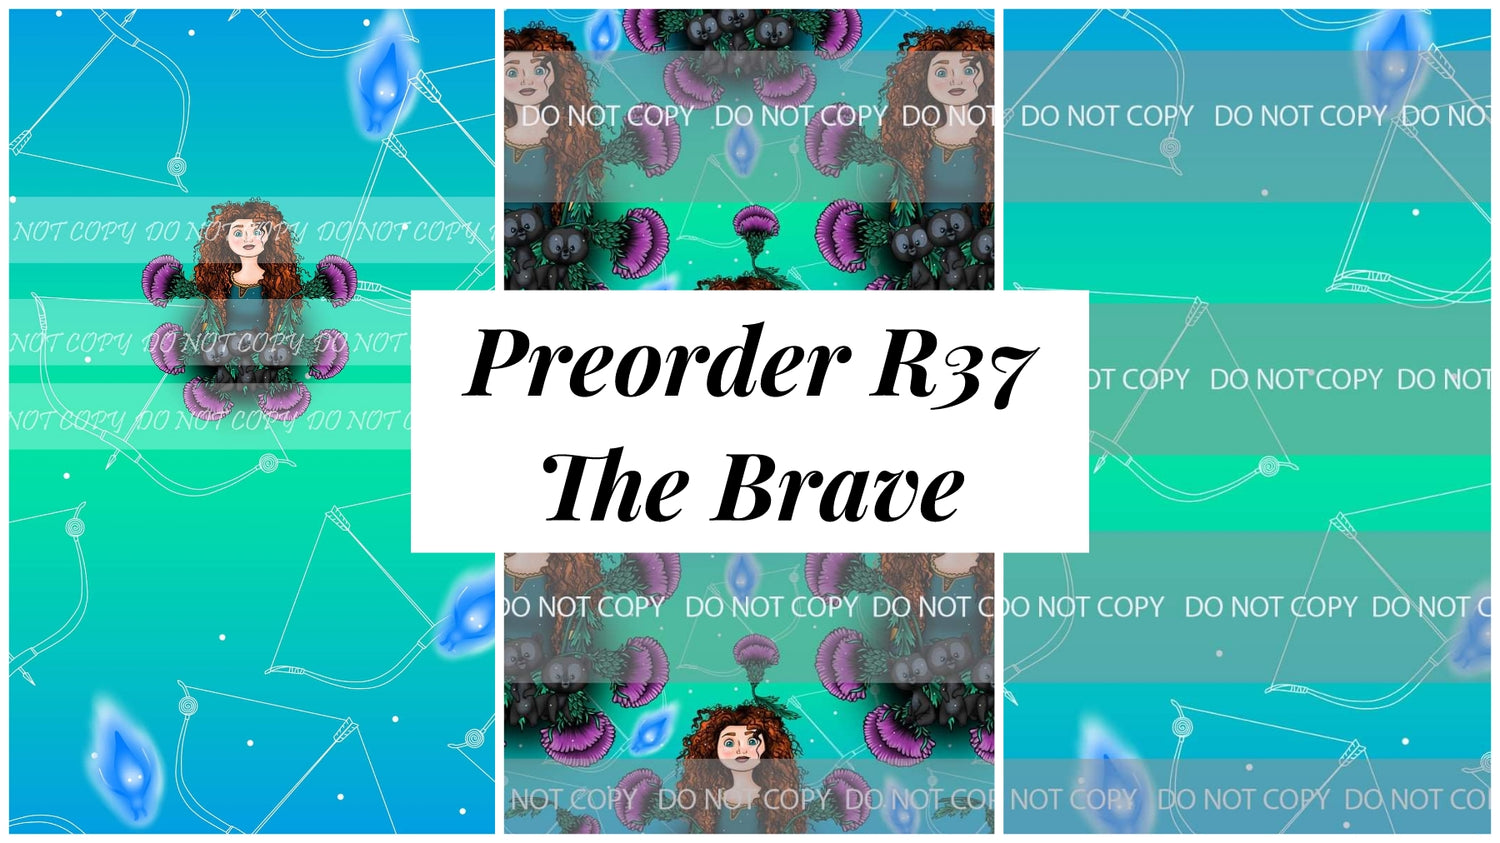 Preorder R37 The Brave